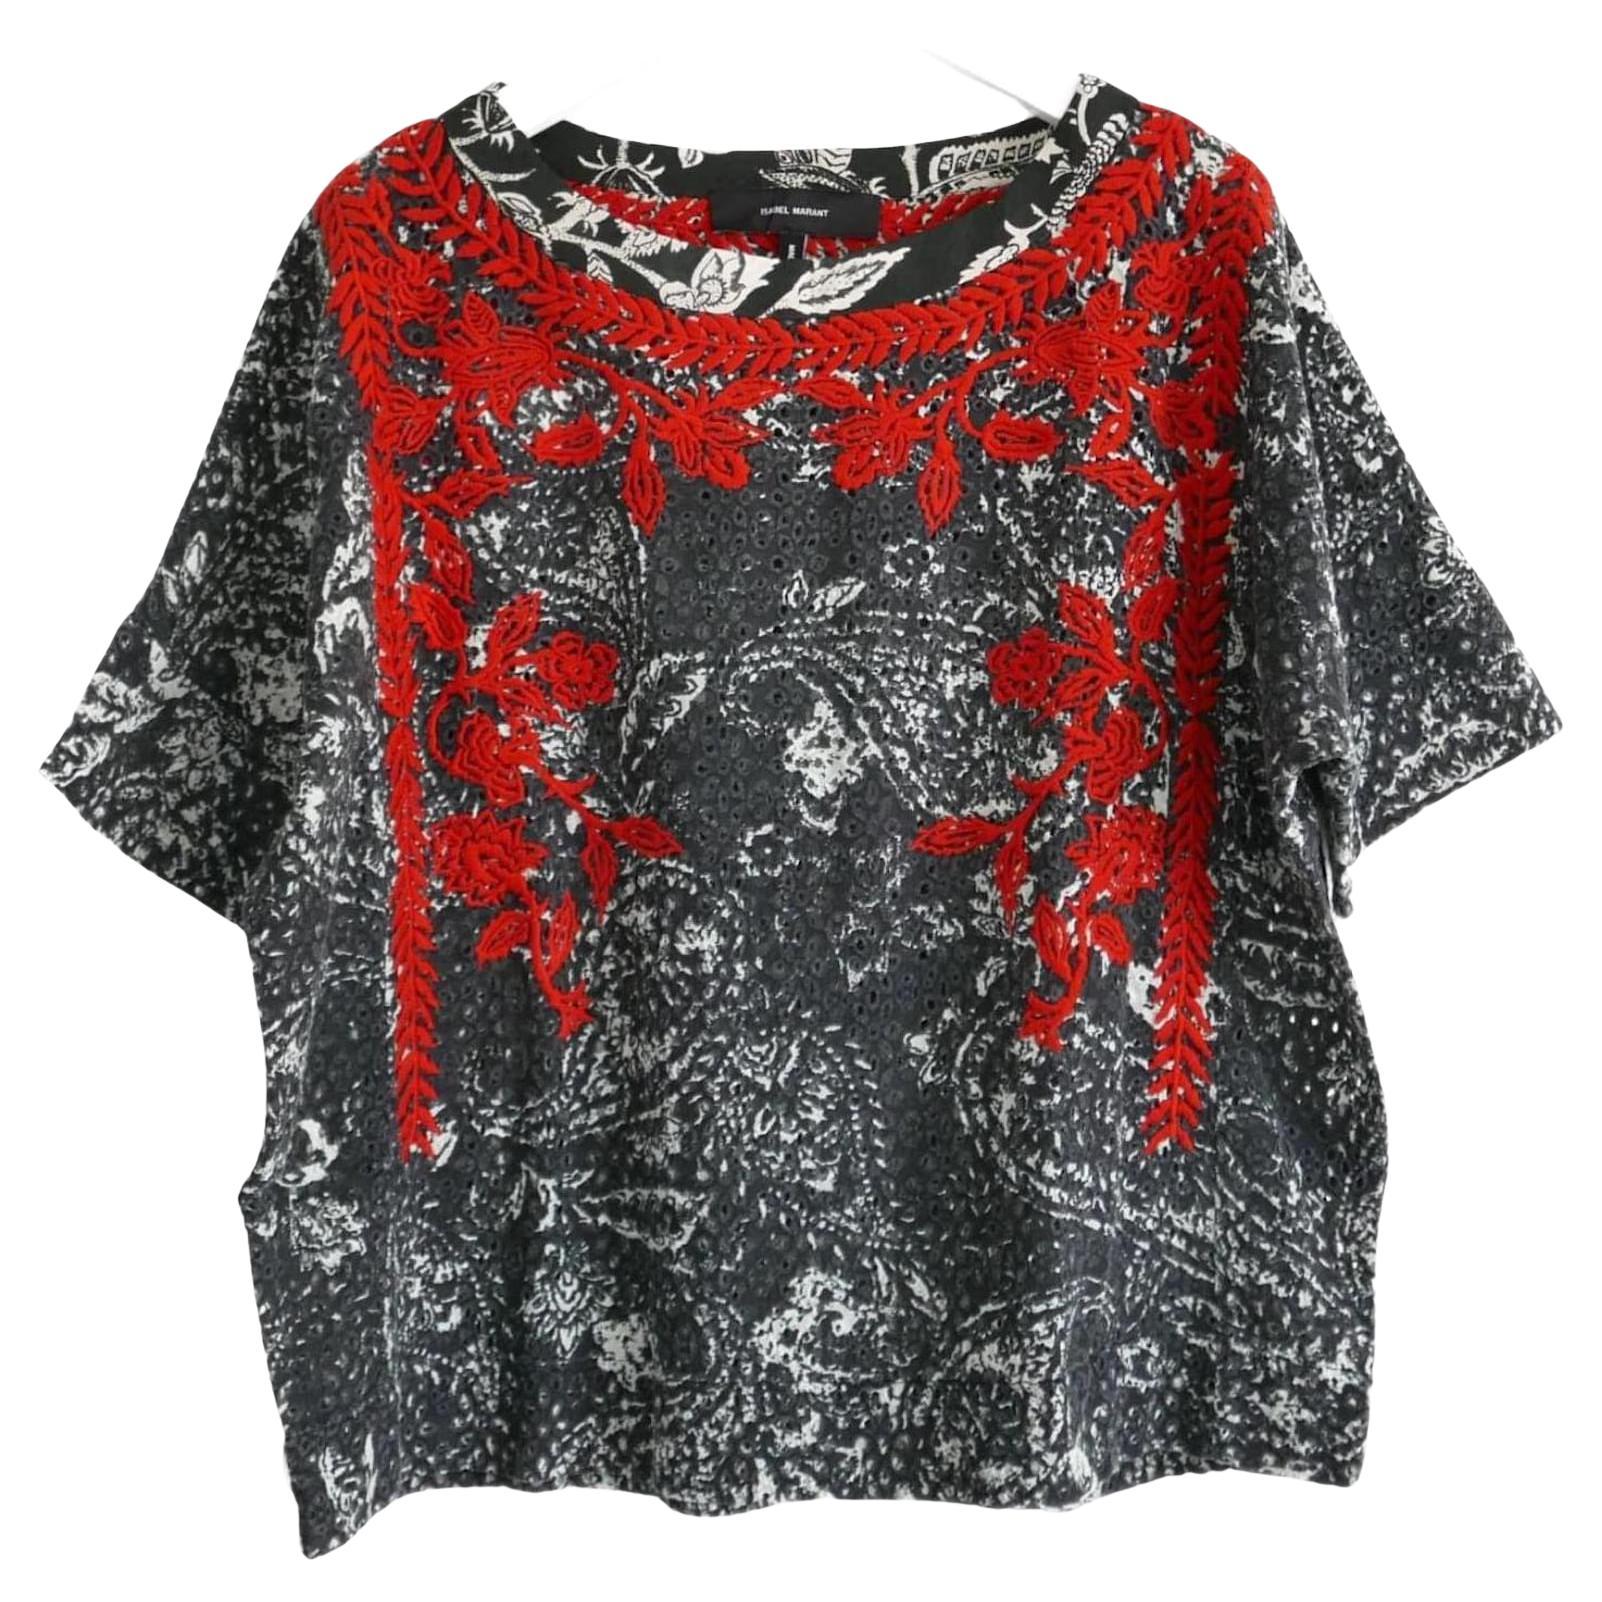 Isabel Marant SS13 Embroidered Top For Sale